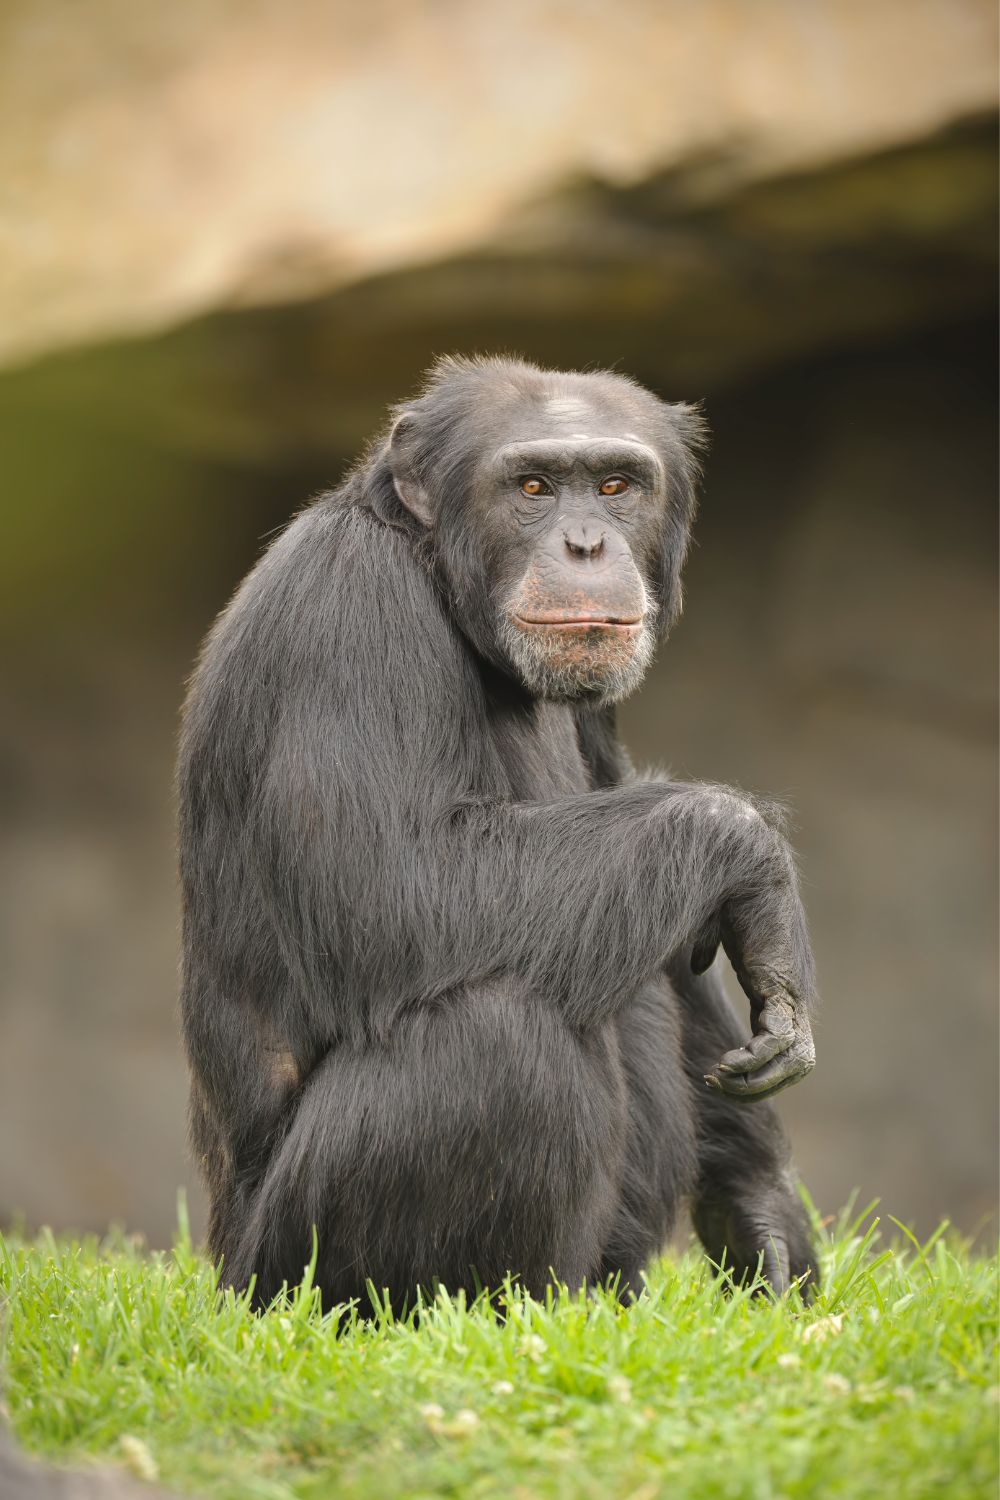 How Often and How Much Do Chimpanzees Eat?